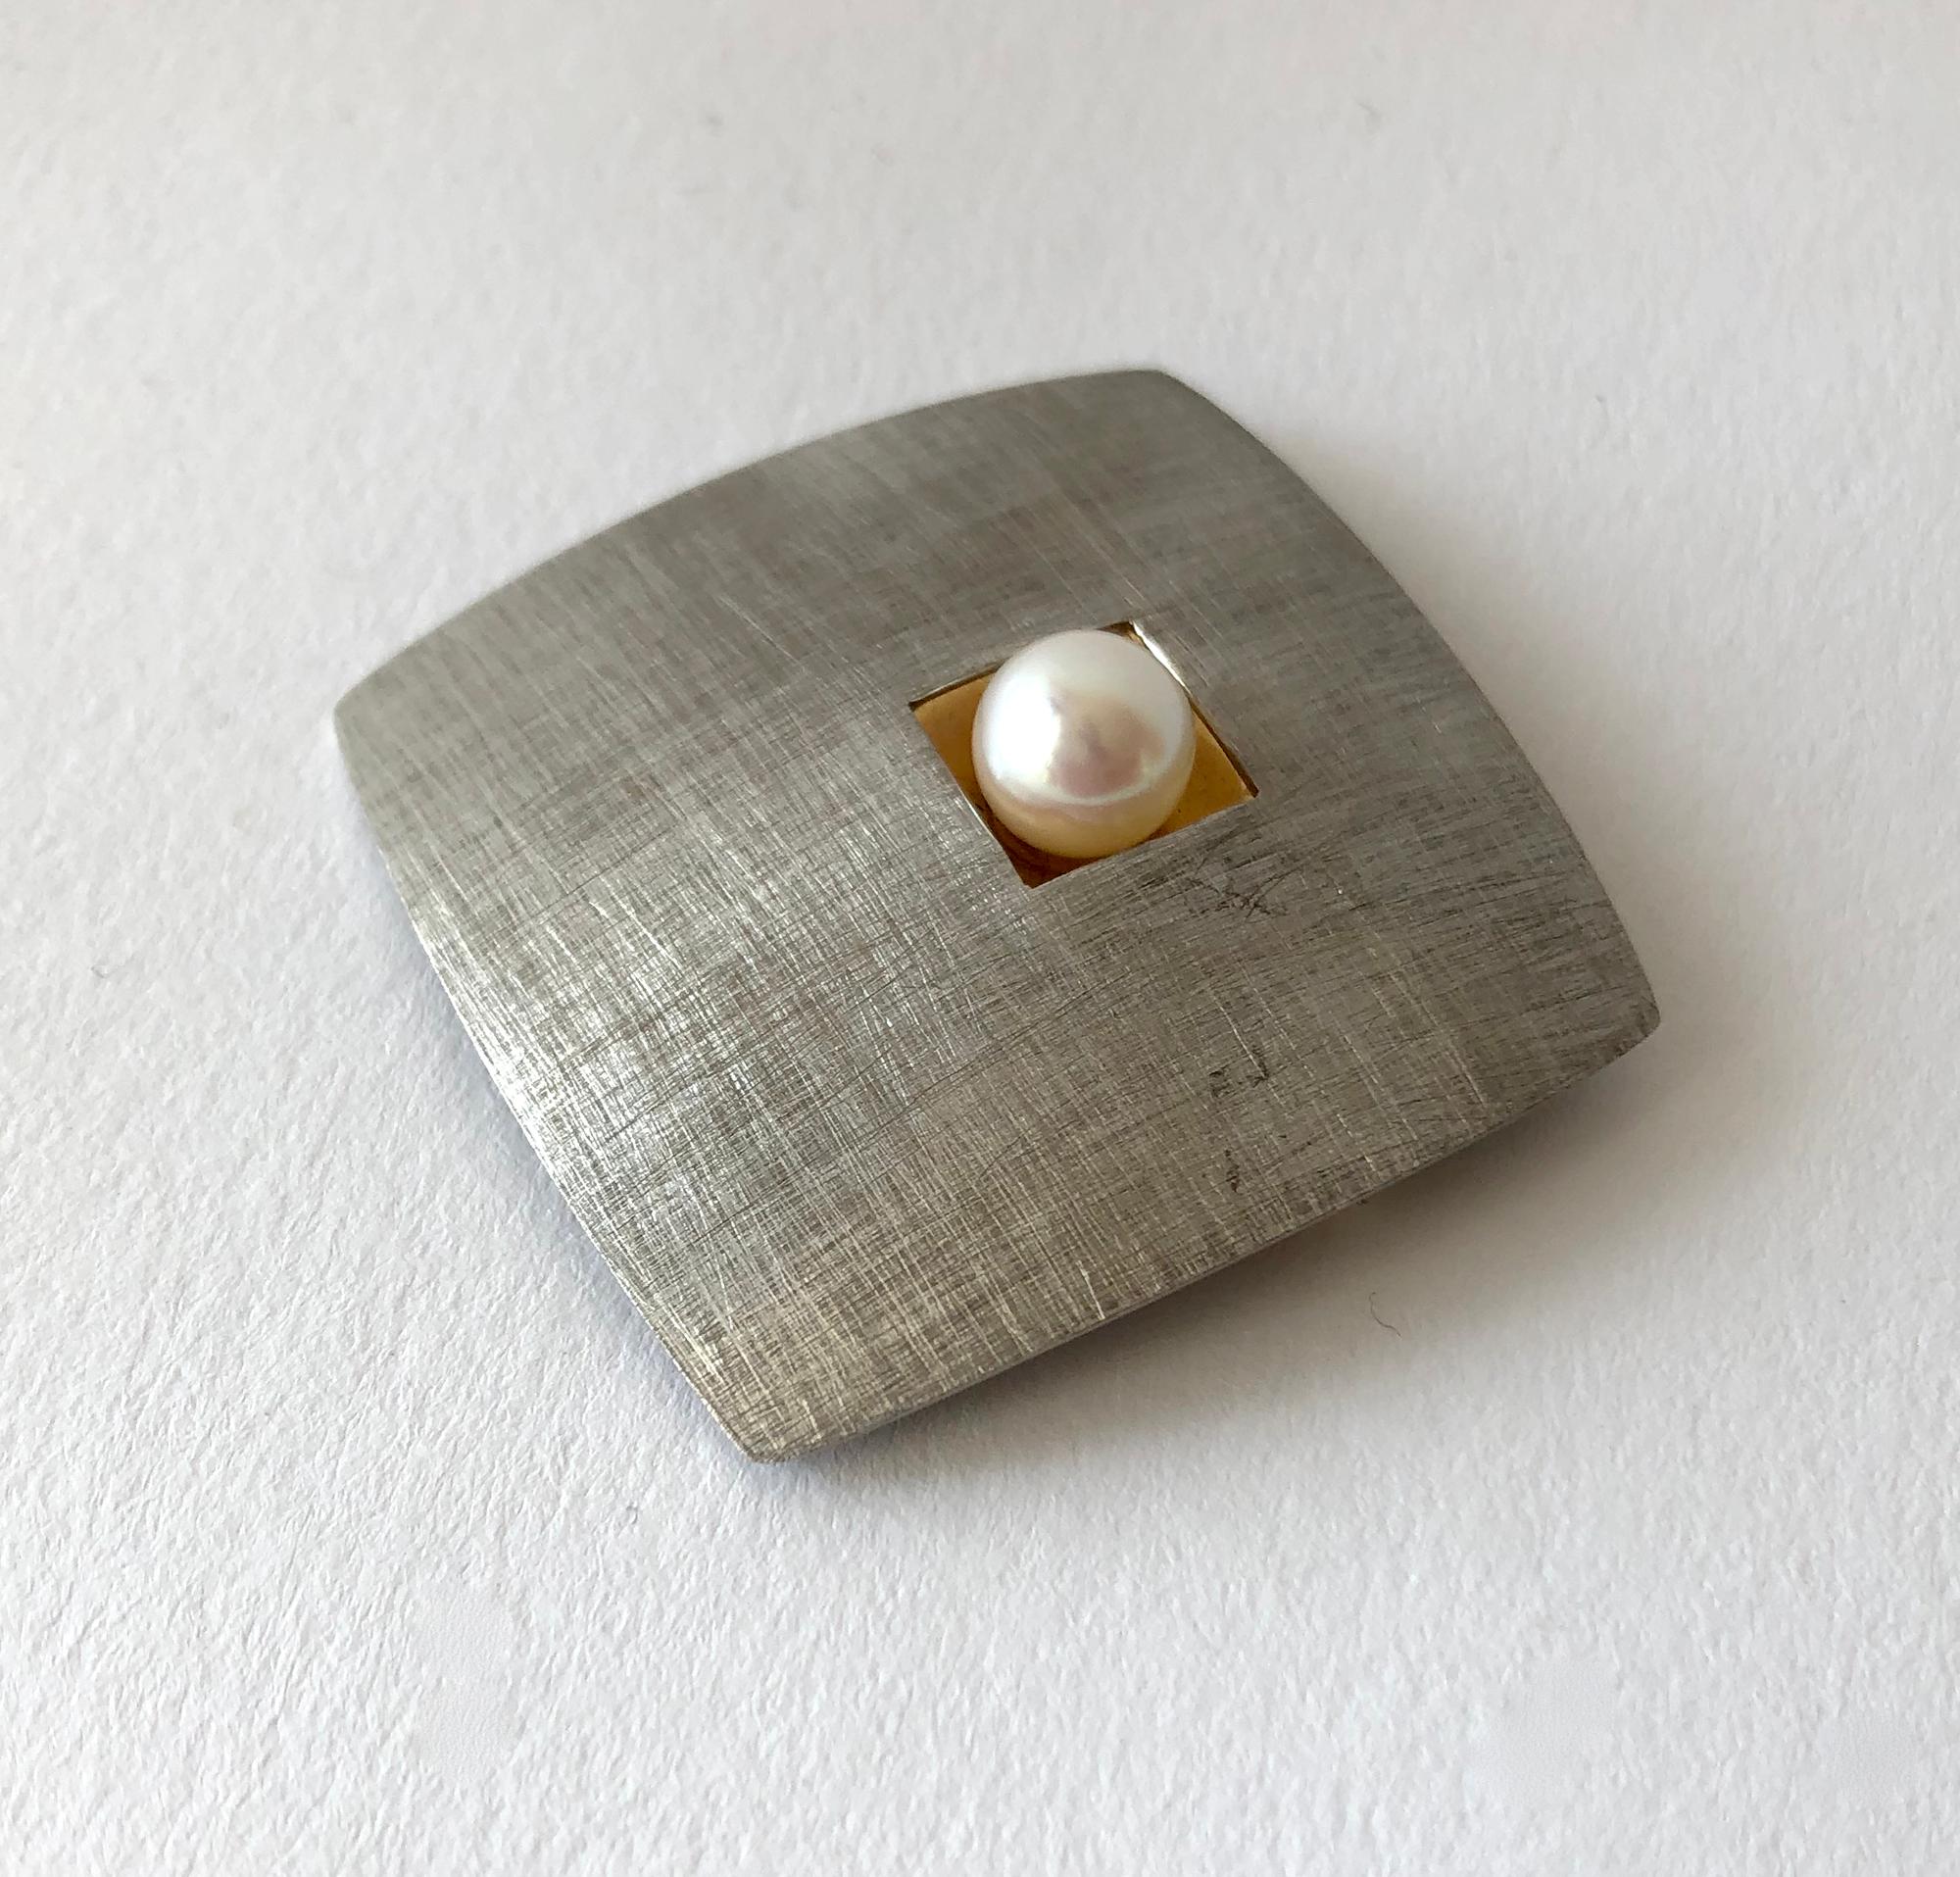 Artisan 1980s 18K Textured White Yellow Gold Brooch Pendant with Pearl